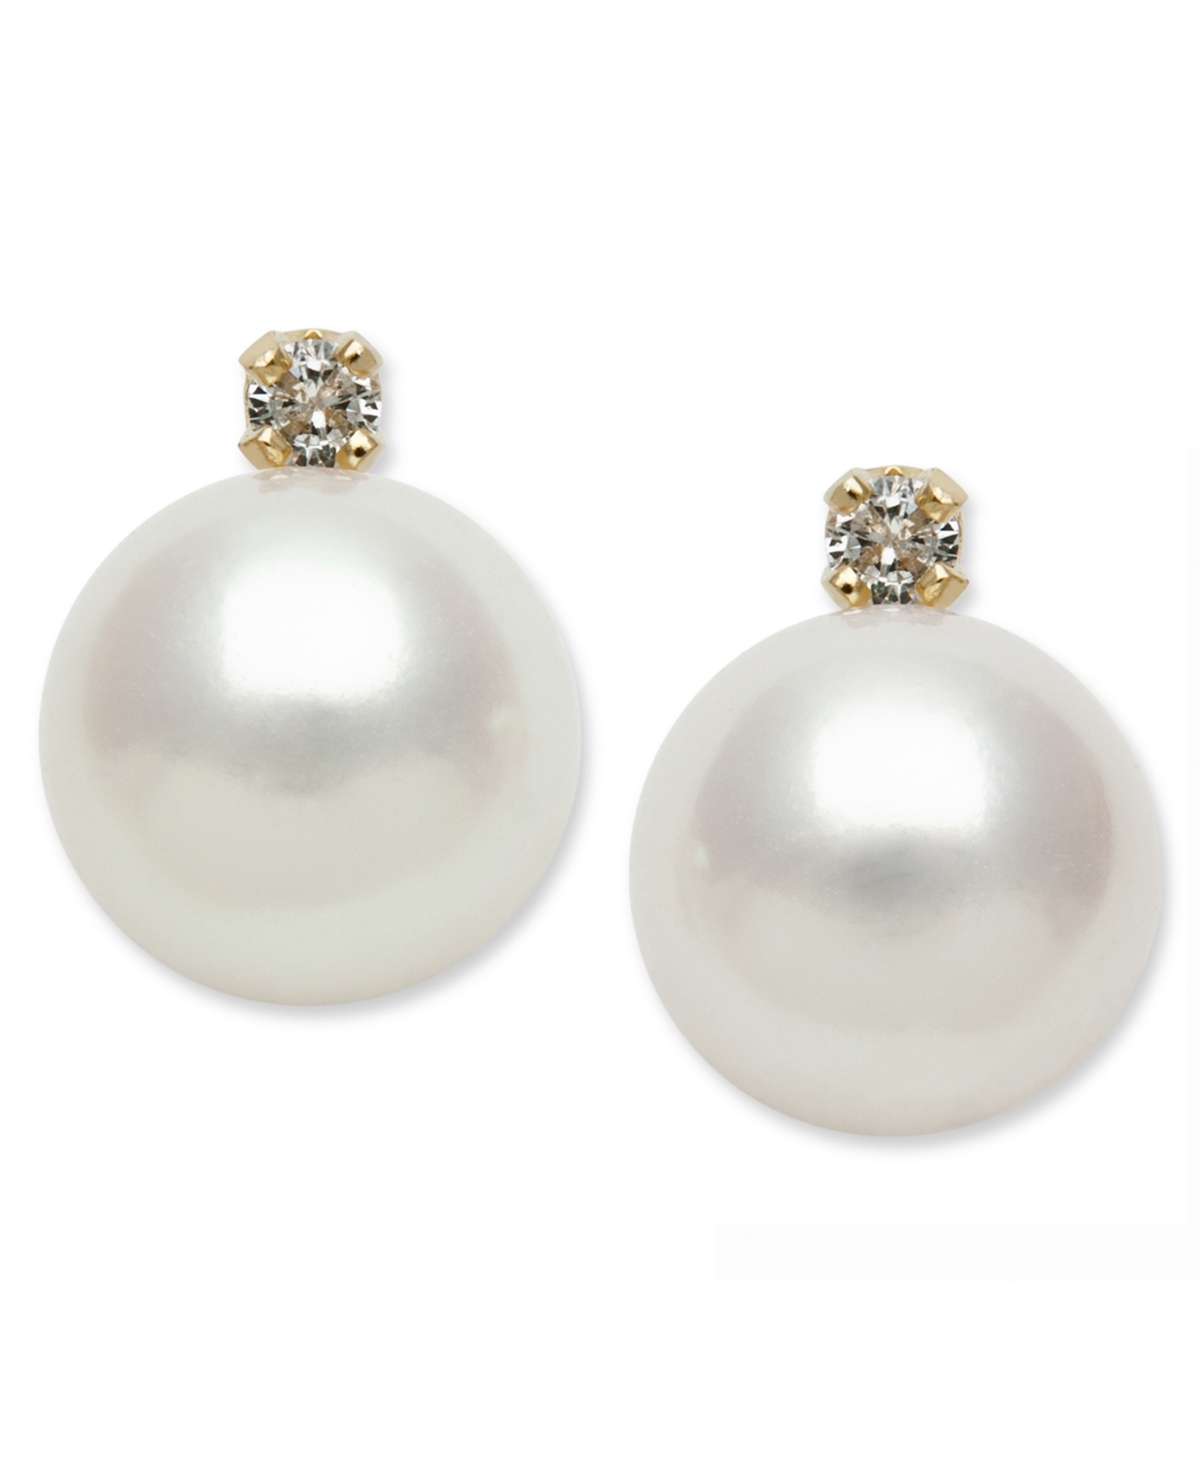 14k Gold Earrings, Cultured Freshwater Pearl (7mm) and Diamond Accent Stud Earrings